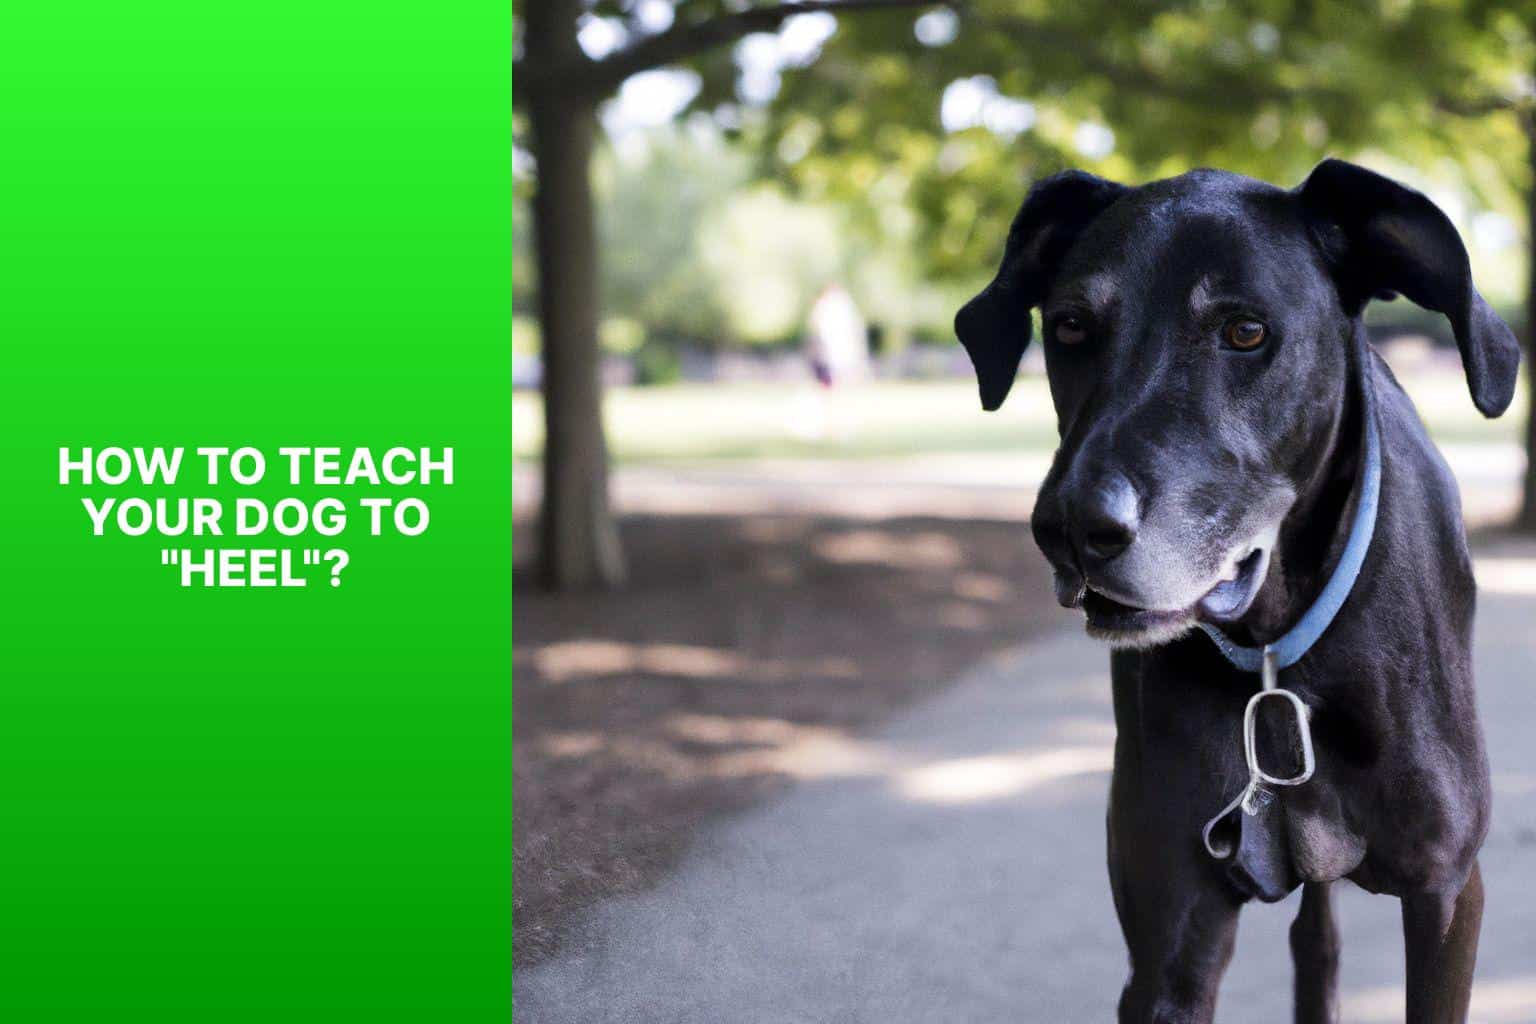 How to Teach Your Dog to "Heel"? - Why Do Dog Owners Say Heel 